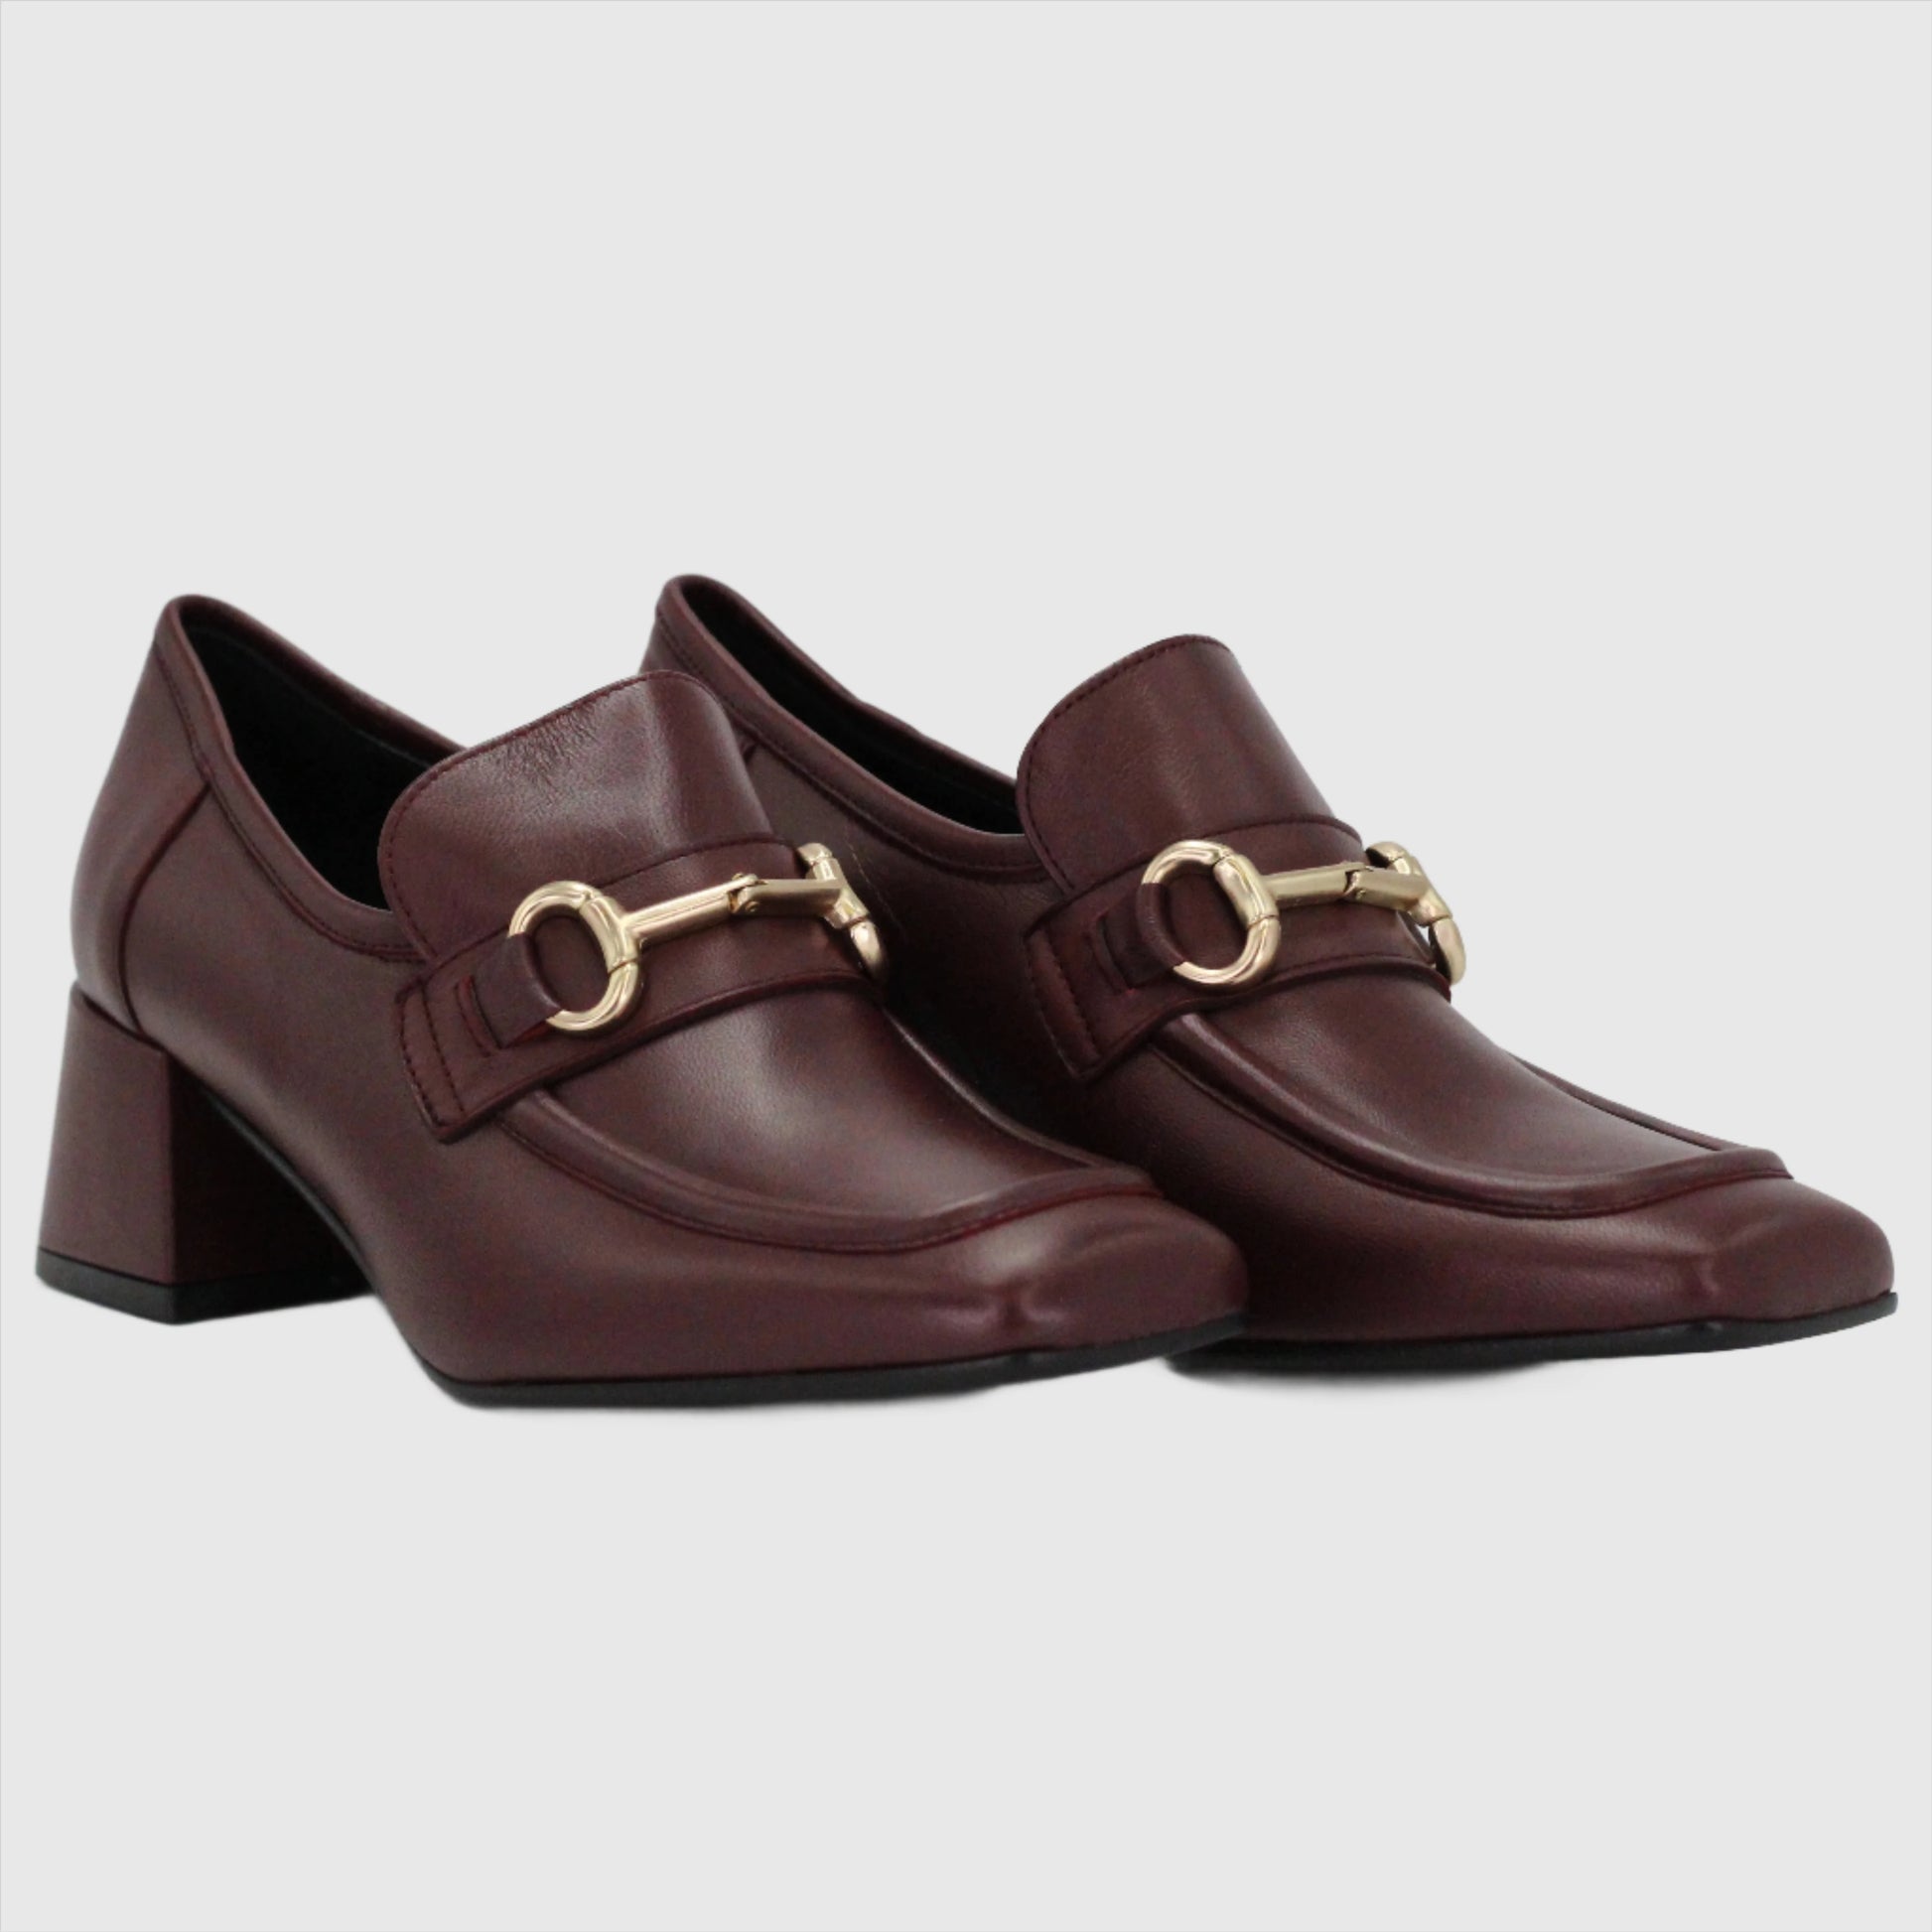 Shop Handmade Italian Leather block heel in bordeaux (NADIA6) or browse our range of hand-made Italian shoes in leather or suede in-store at Aliverti Cape Town, or shop online. We deliver in South Africa & offer multiple payment plans as well as accept multiple safe & secure payment methods.